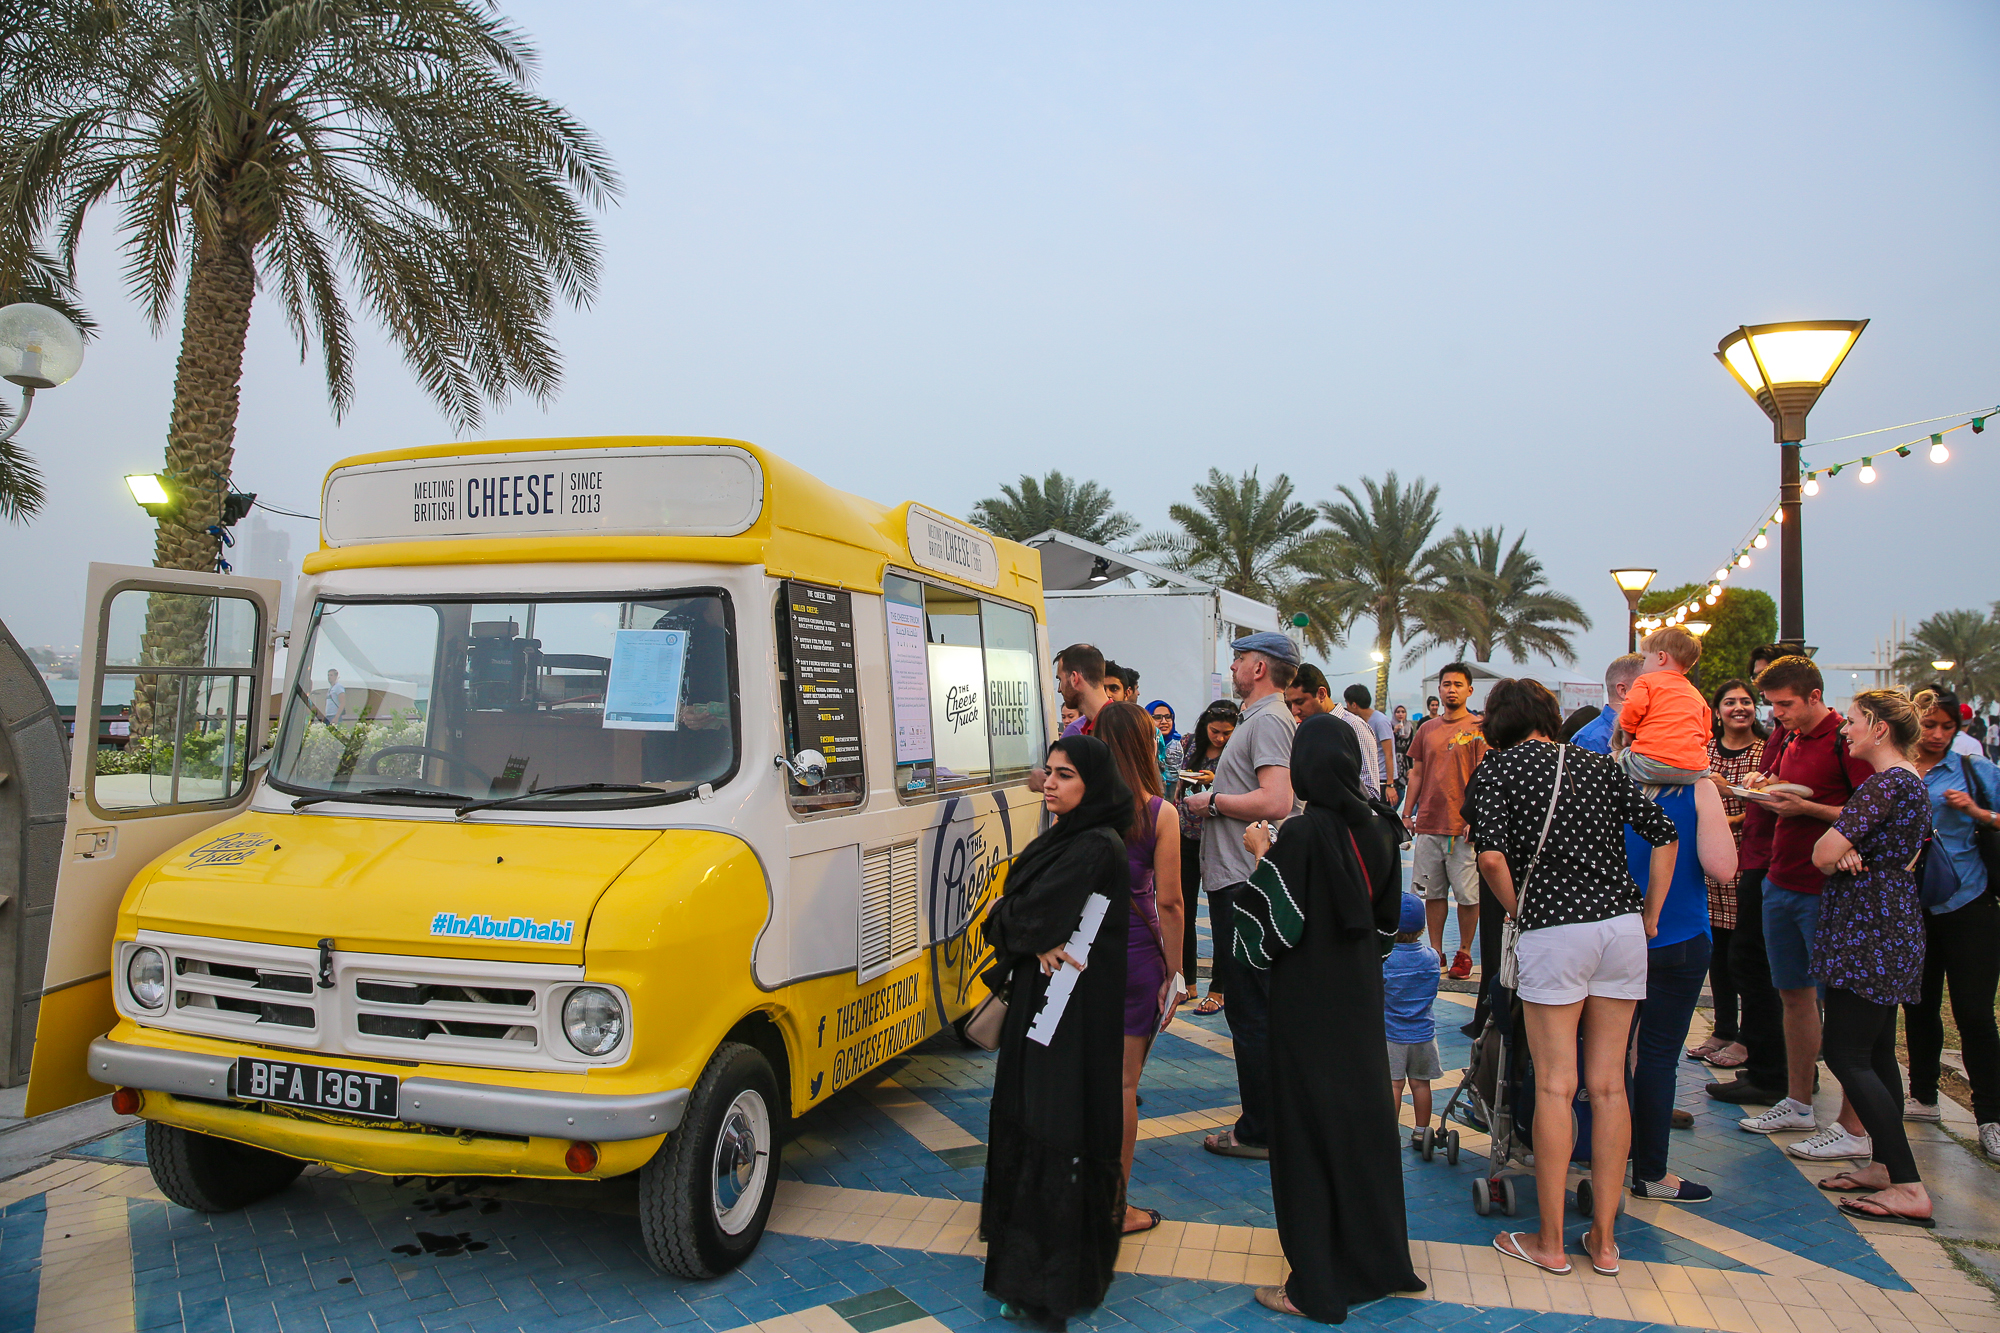 The Cheese truck attracts foodies